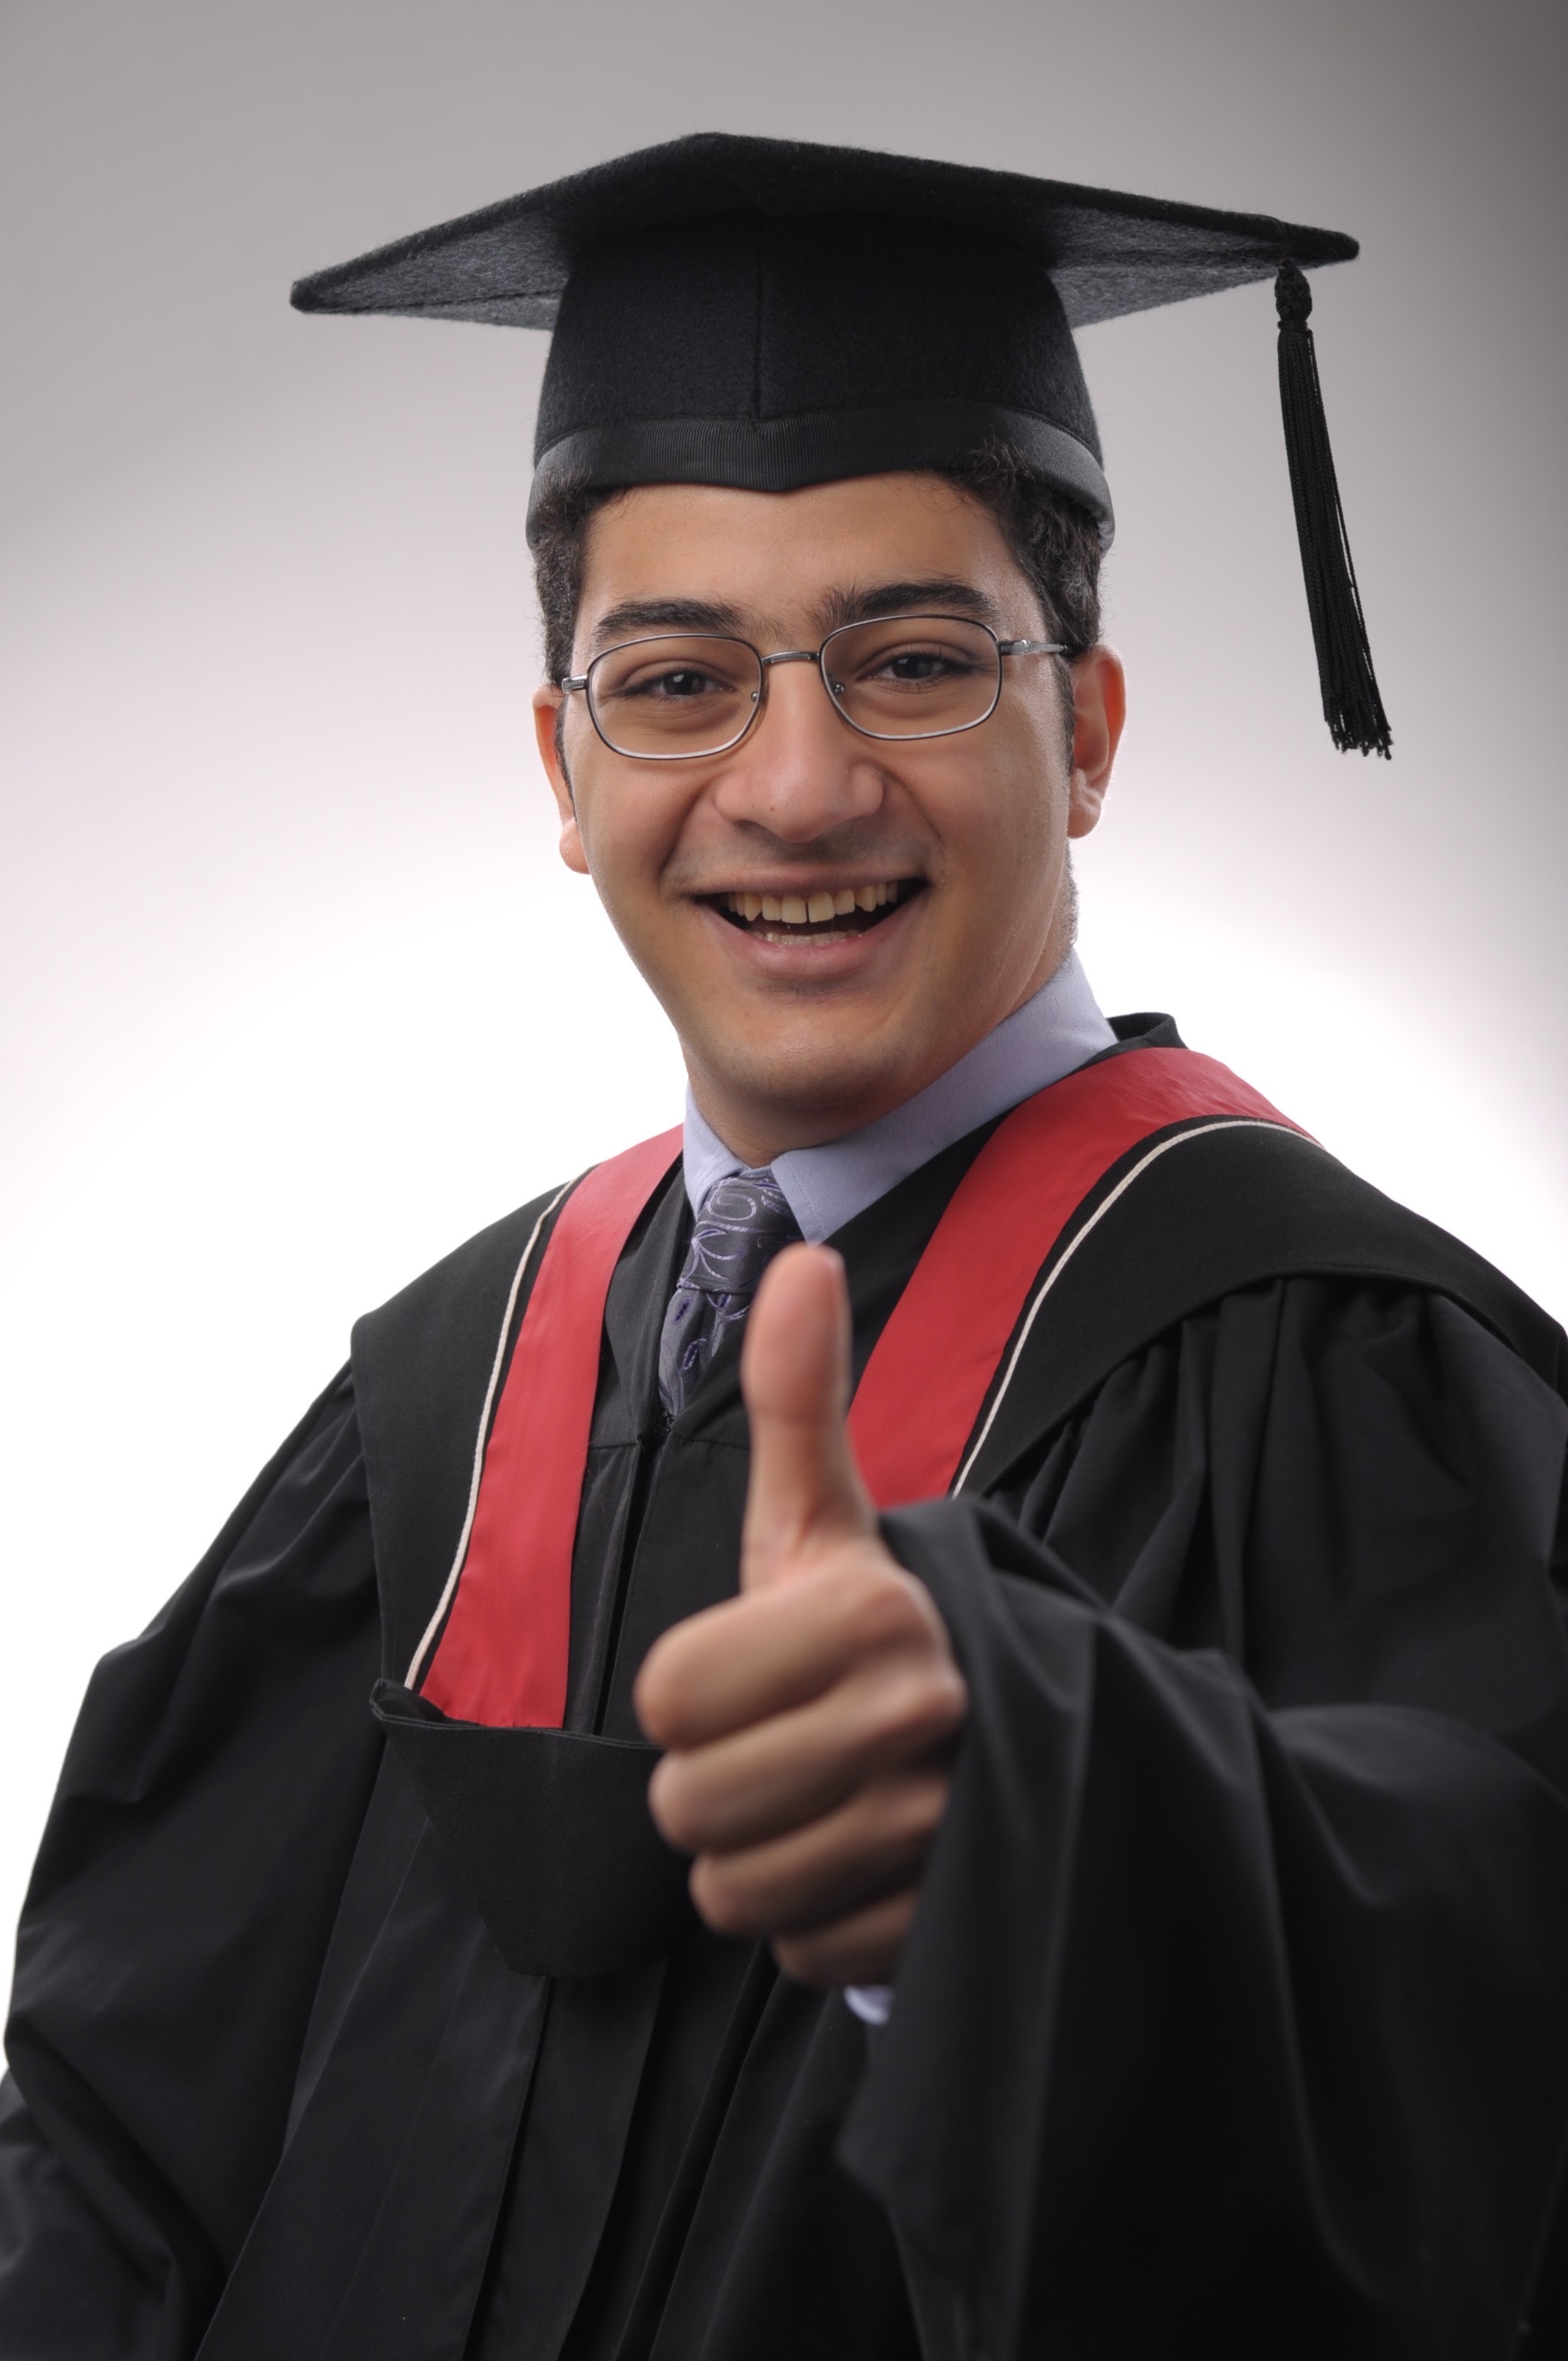 My graduation picture from Waterloo, April 2017